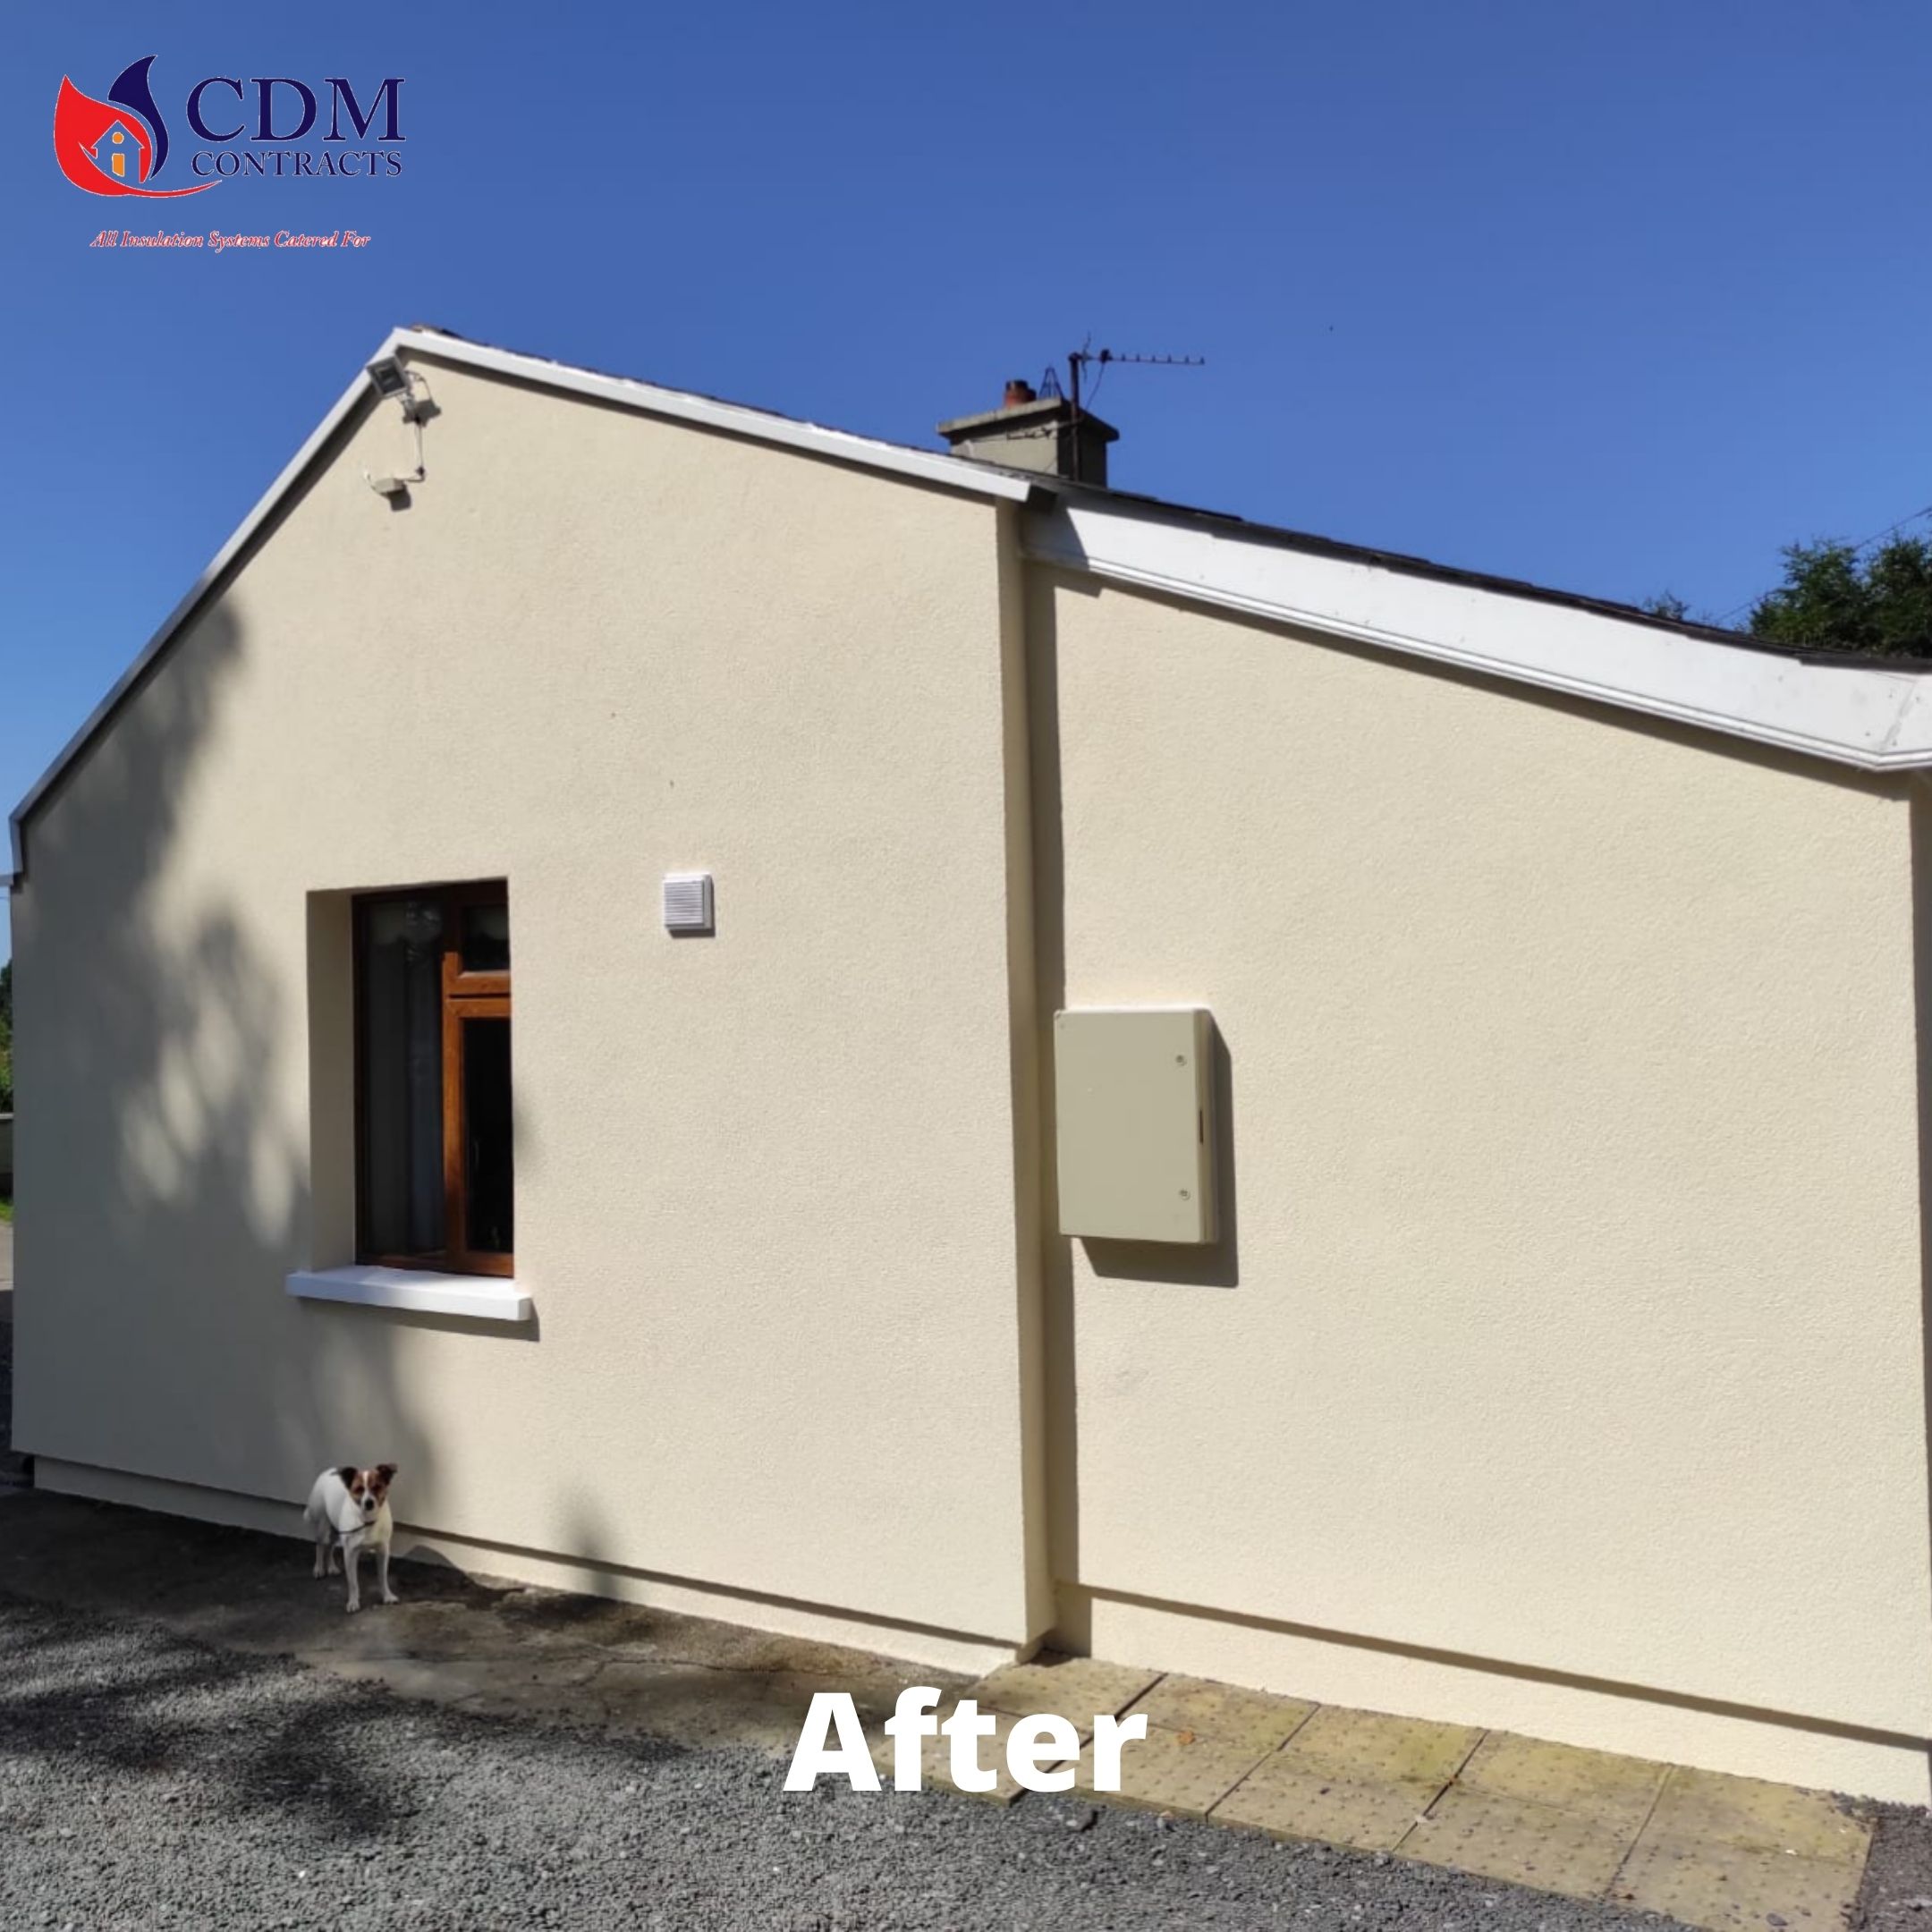 Project: Better Energy Homes Co. Longford - completed